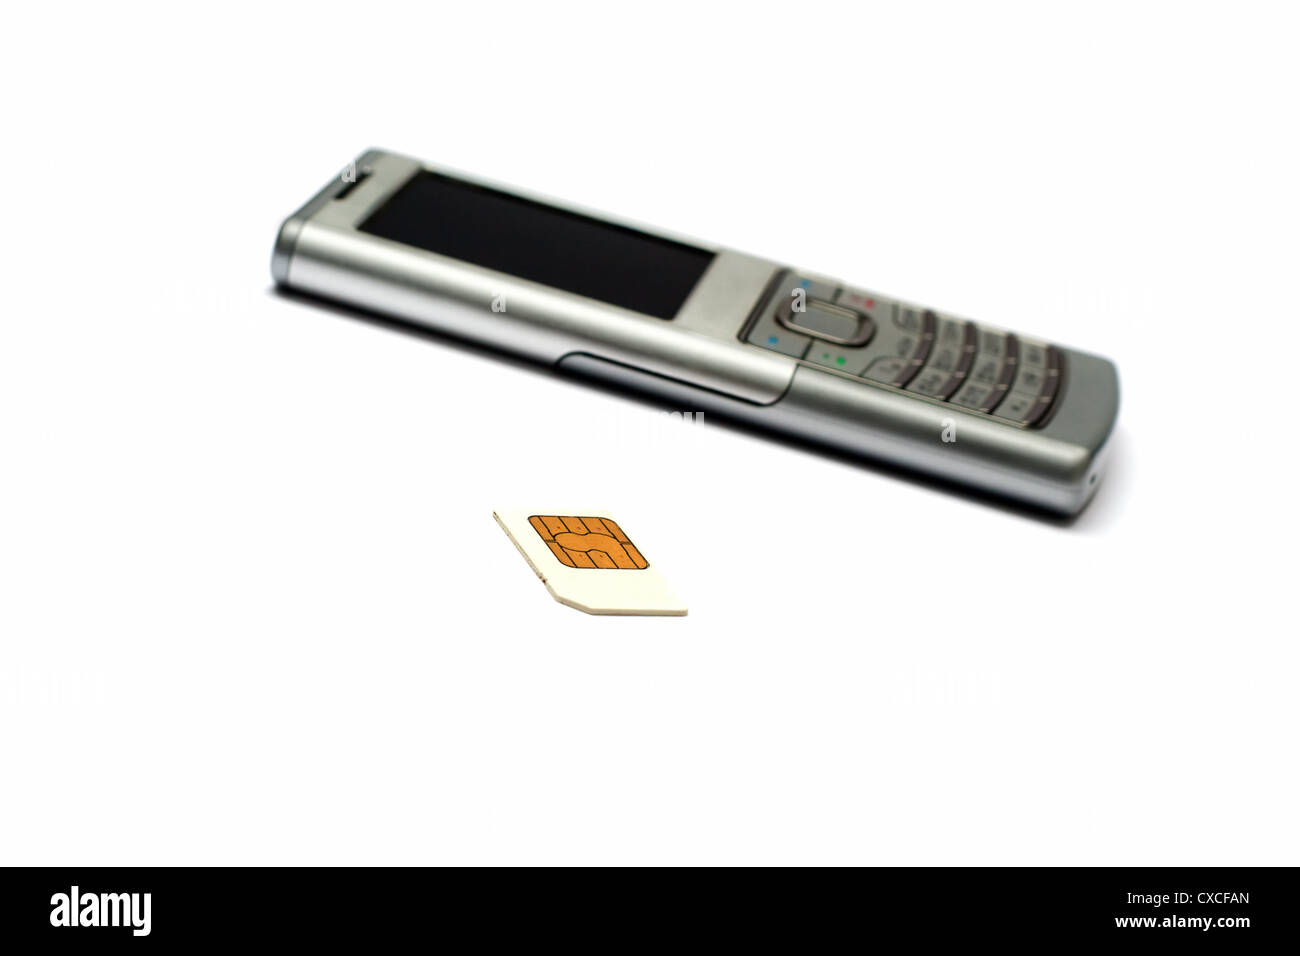 Phone and SIM card on a white background Stock Photo